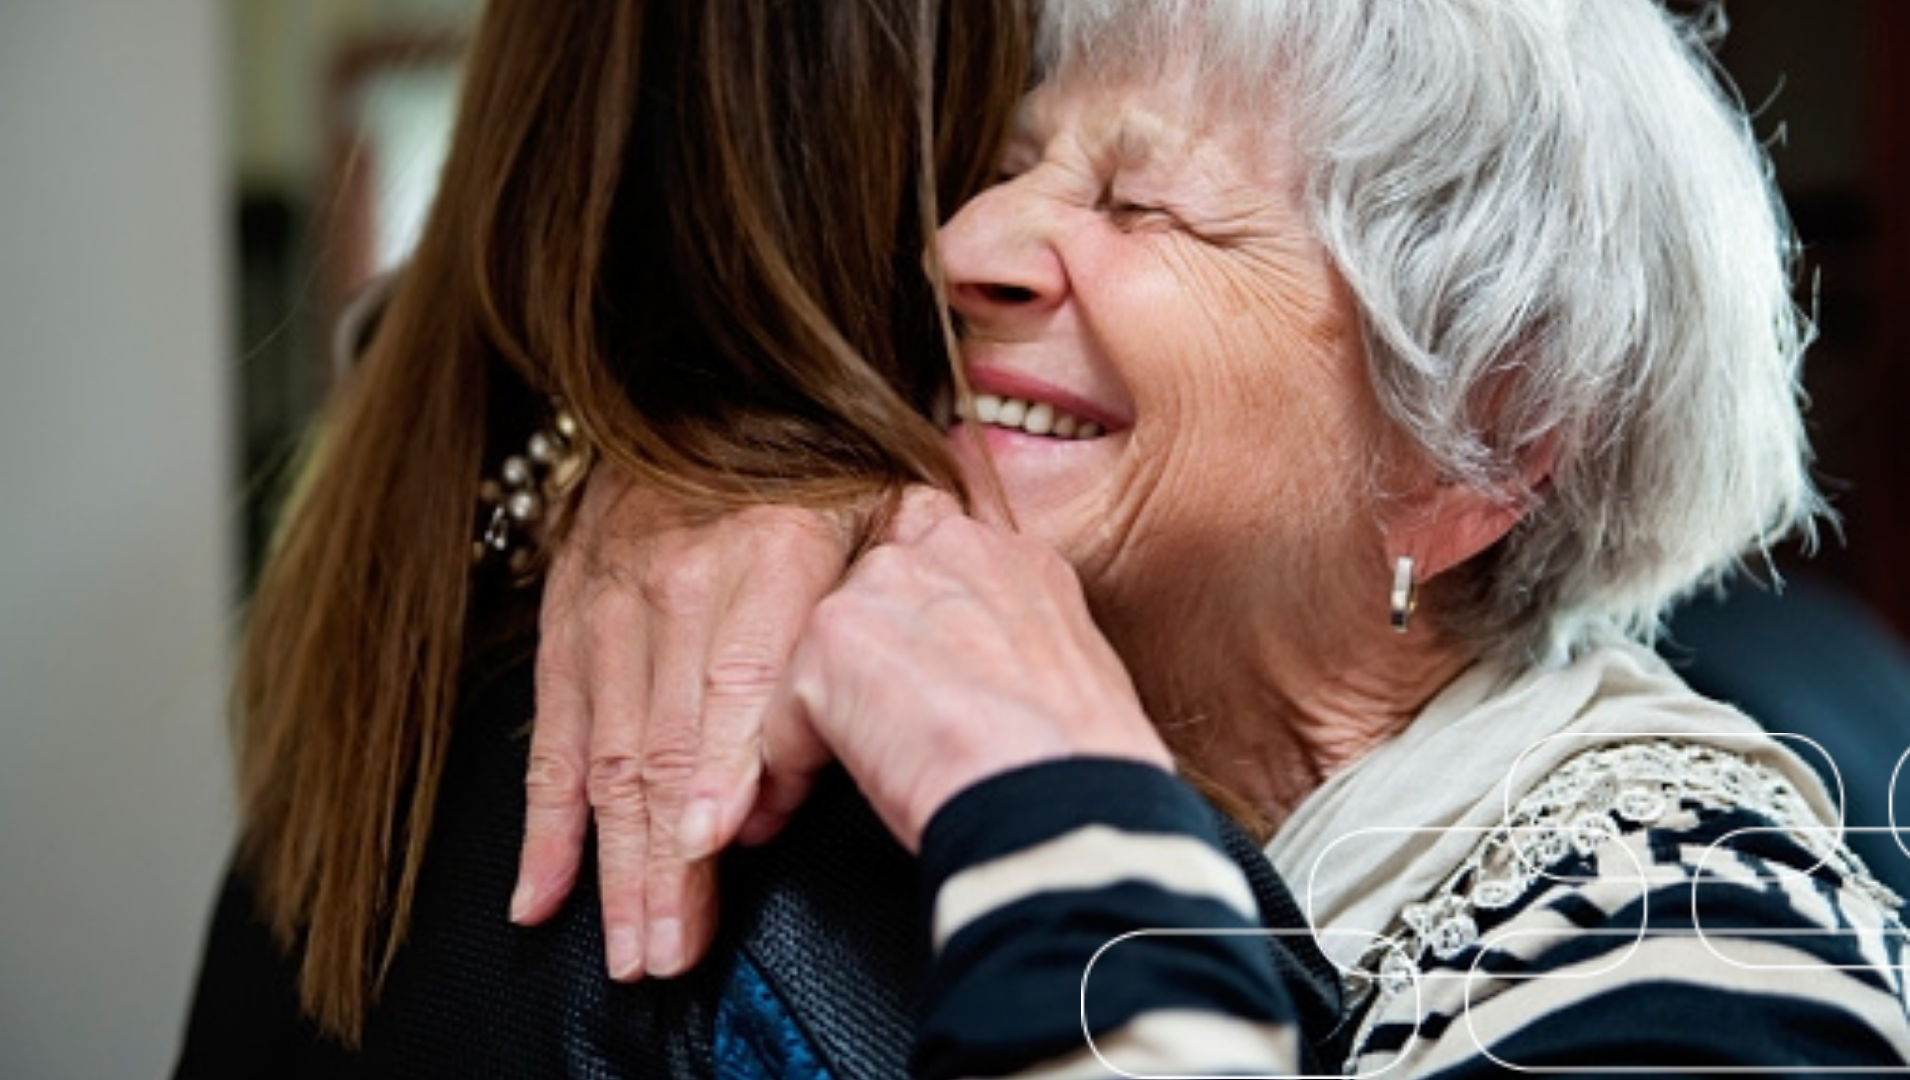 An female older adult with silver hair happily embracing a woman with long brown hair